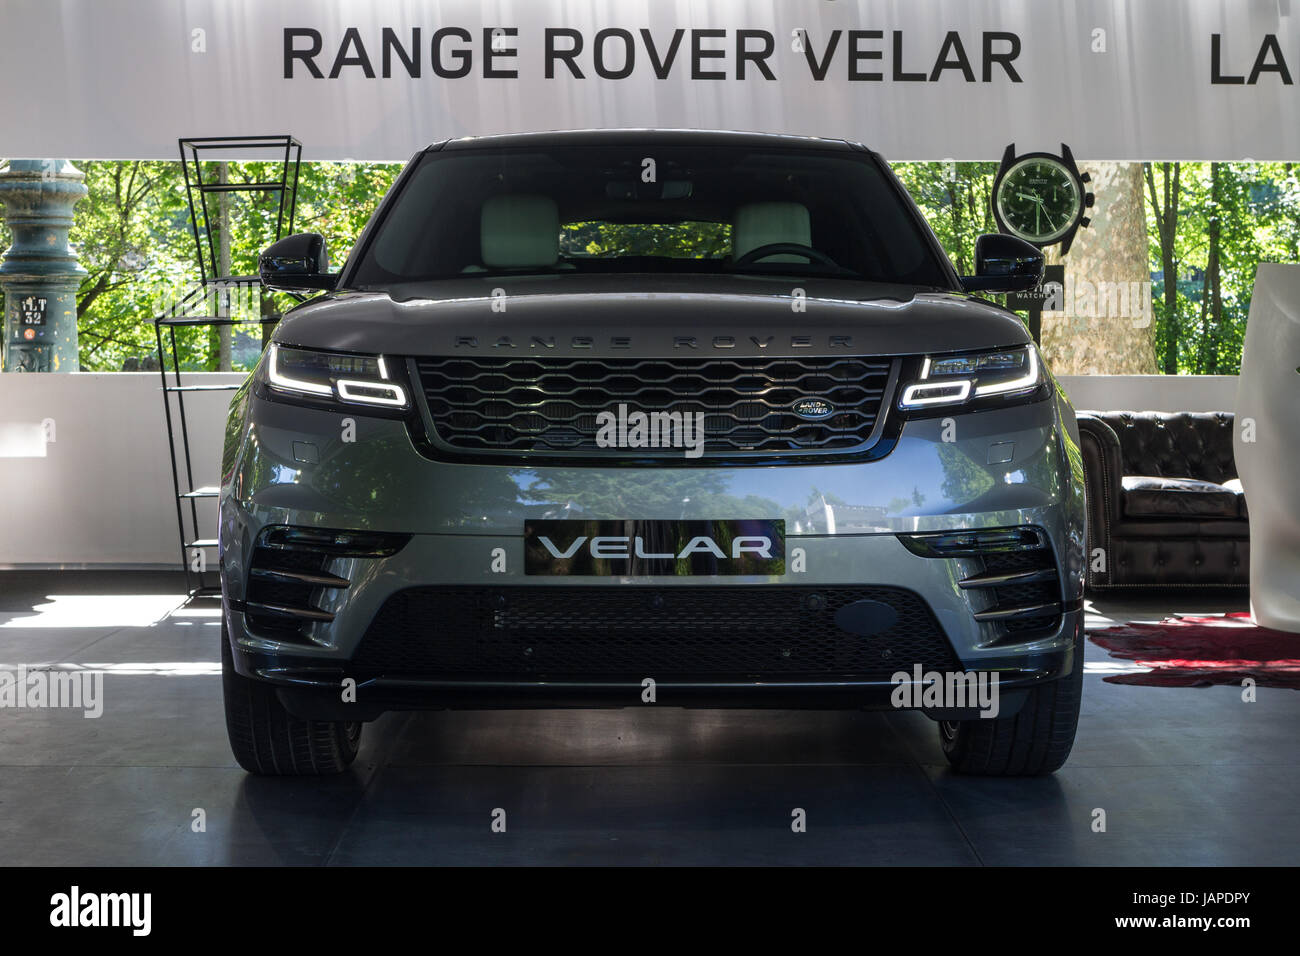 Turin, Italy, 7th June 2017. Front view of Range Rover Velar. Third edition of Parco Valentino car show hosts cars by many automobile manufacturers and car designers inside Valentino Park in Torino, Italy. Stock Photo